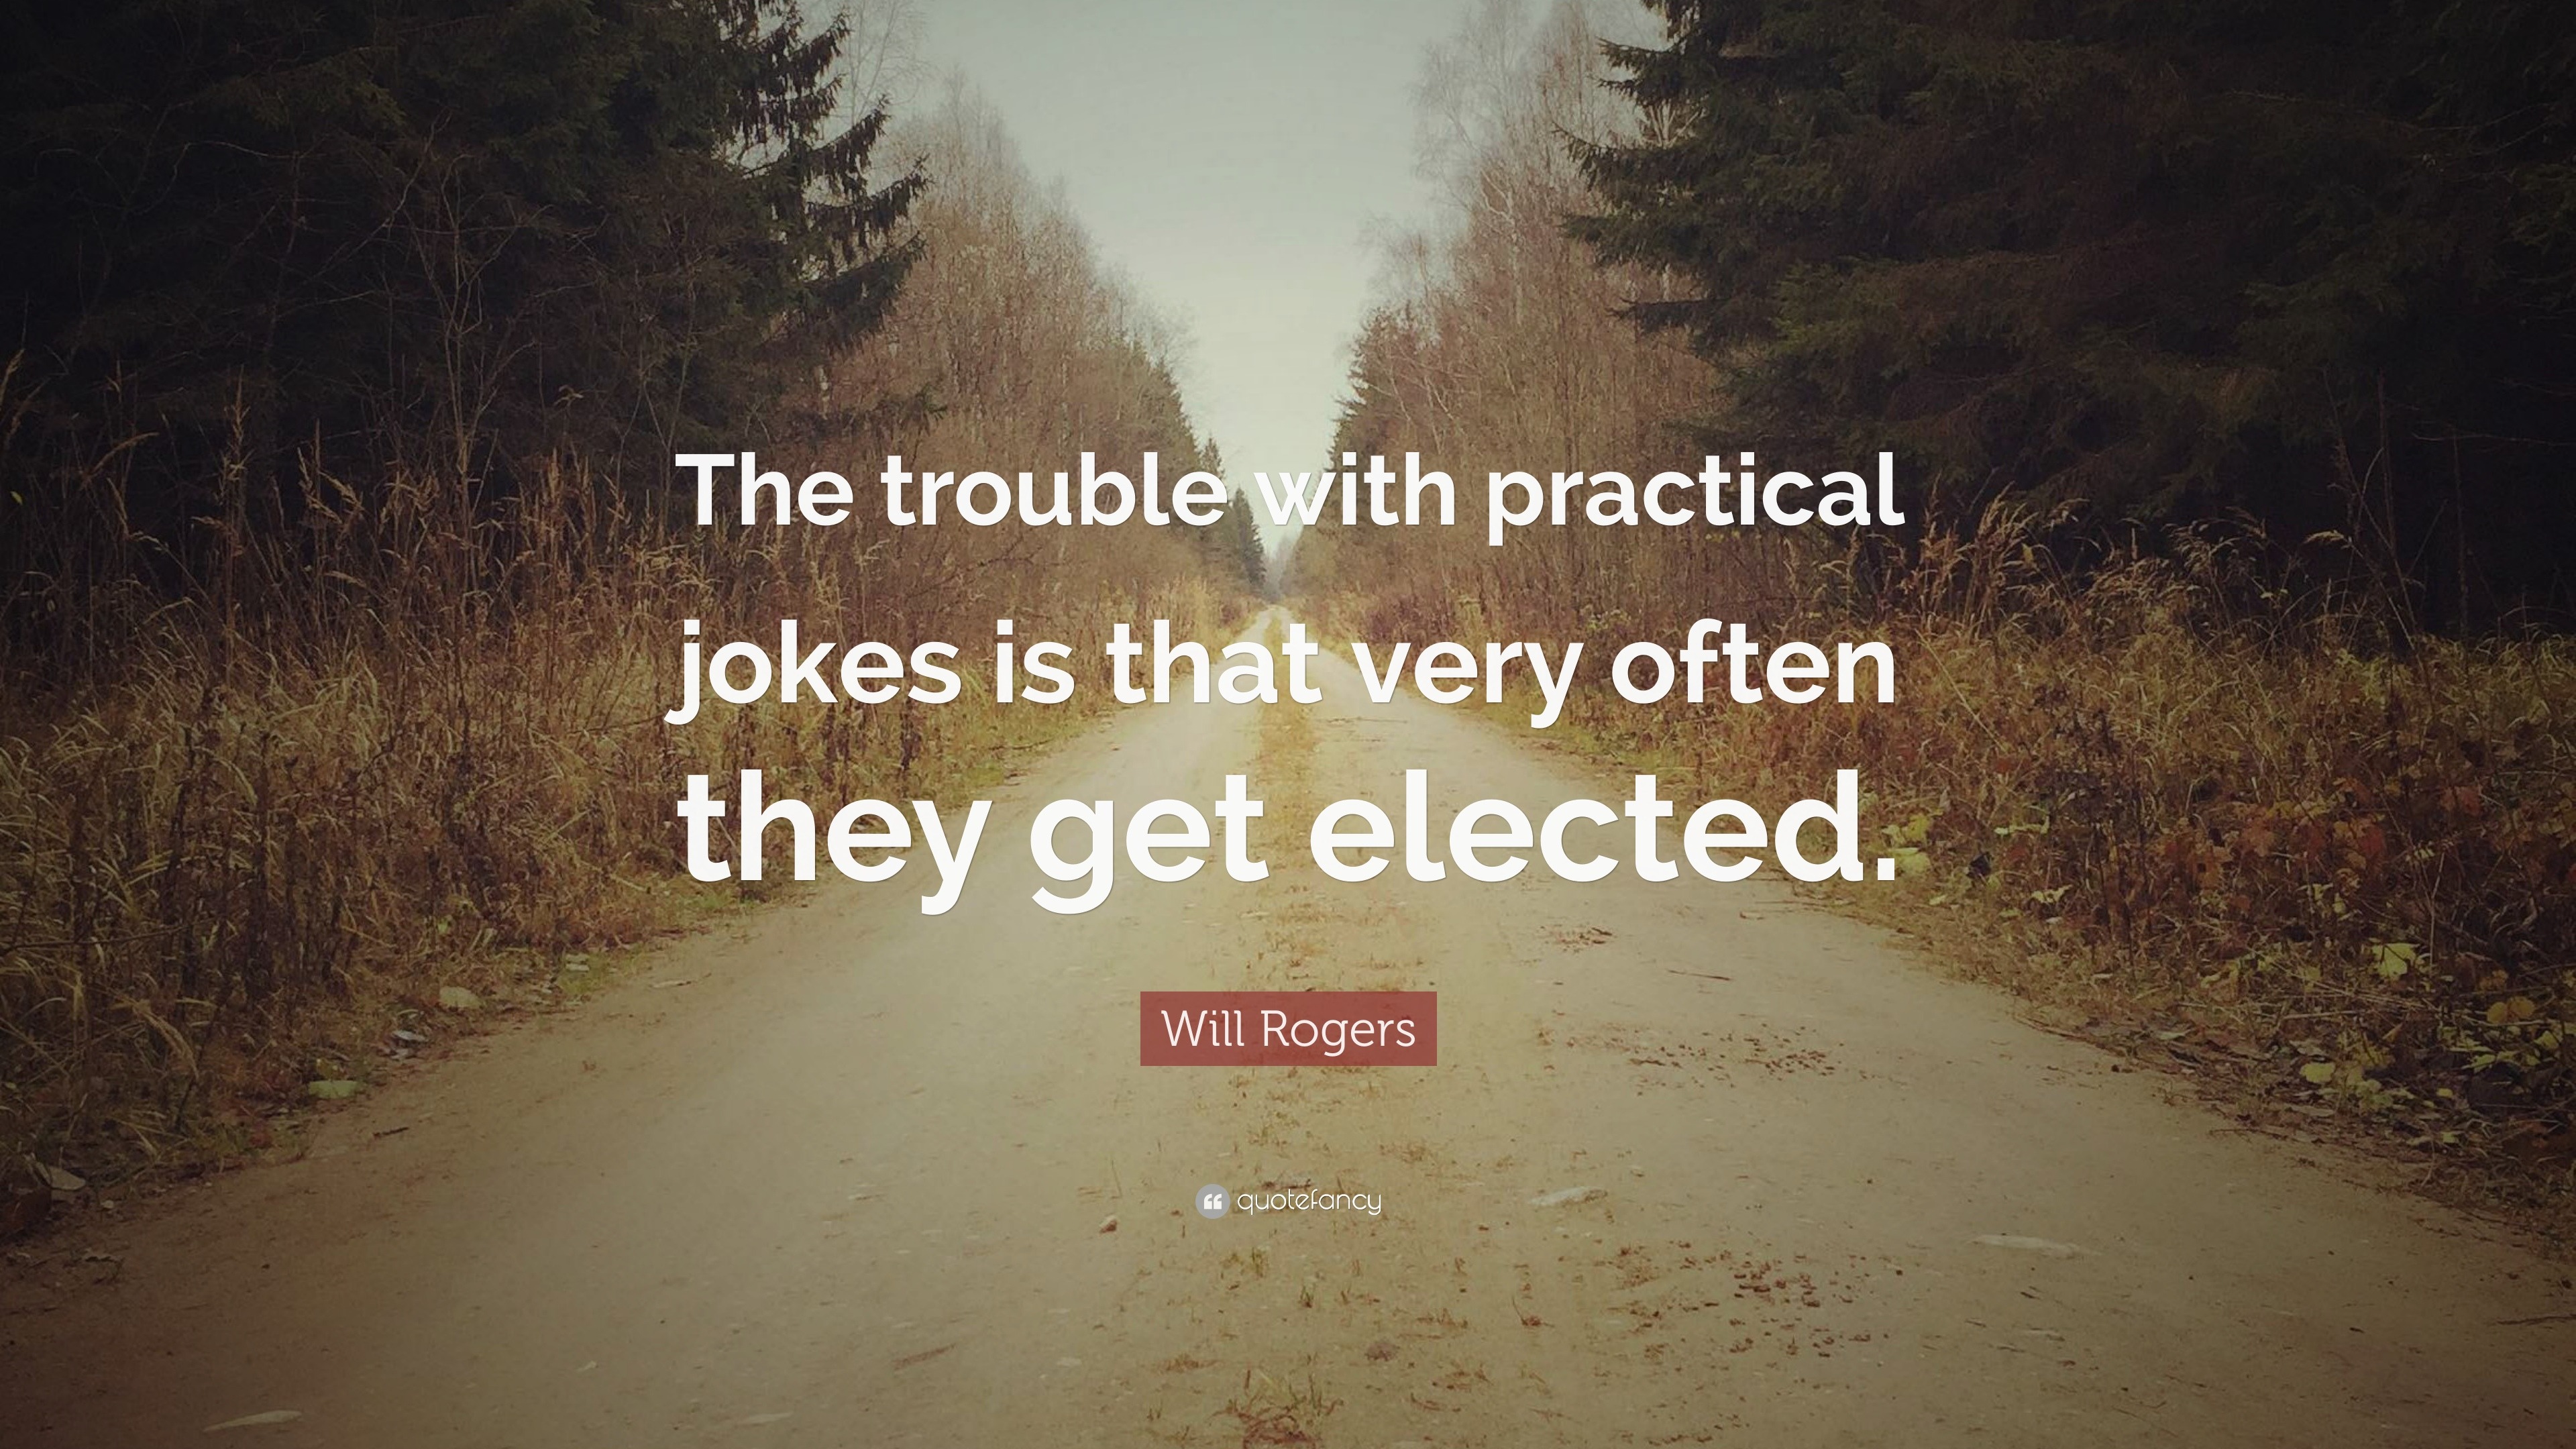 Will Rogers Quote: "The trouble with practical jokes is that very often they get elected." (10 ...